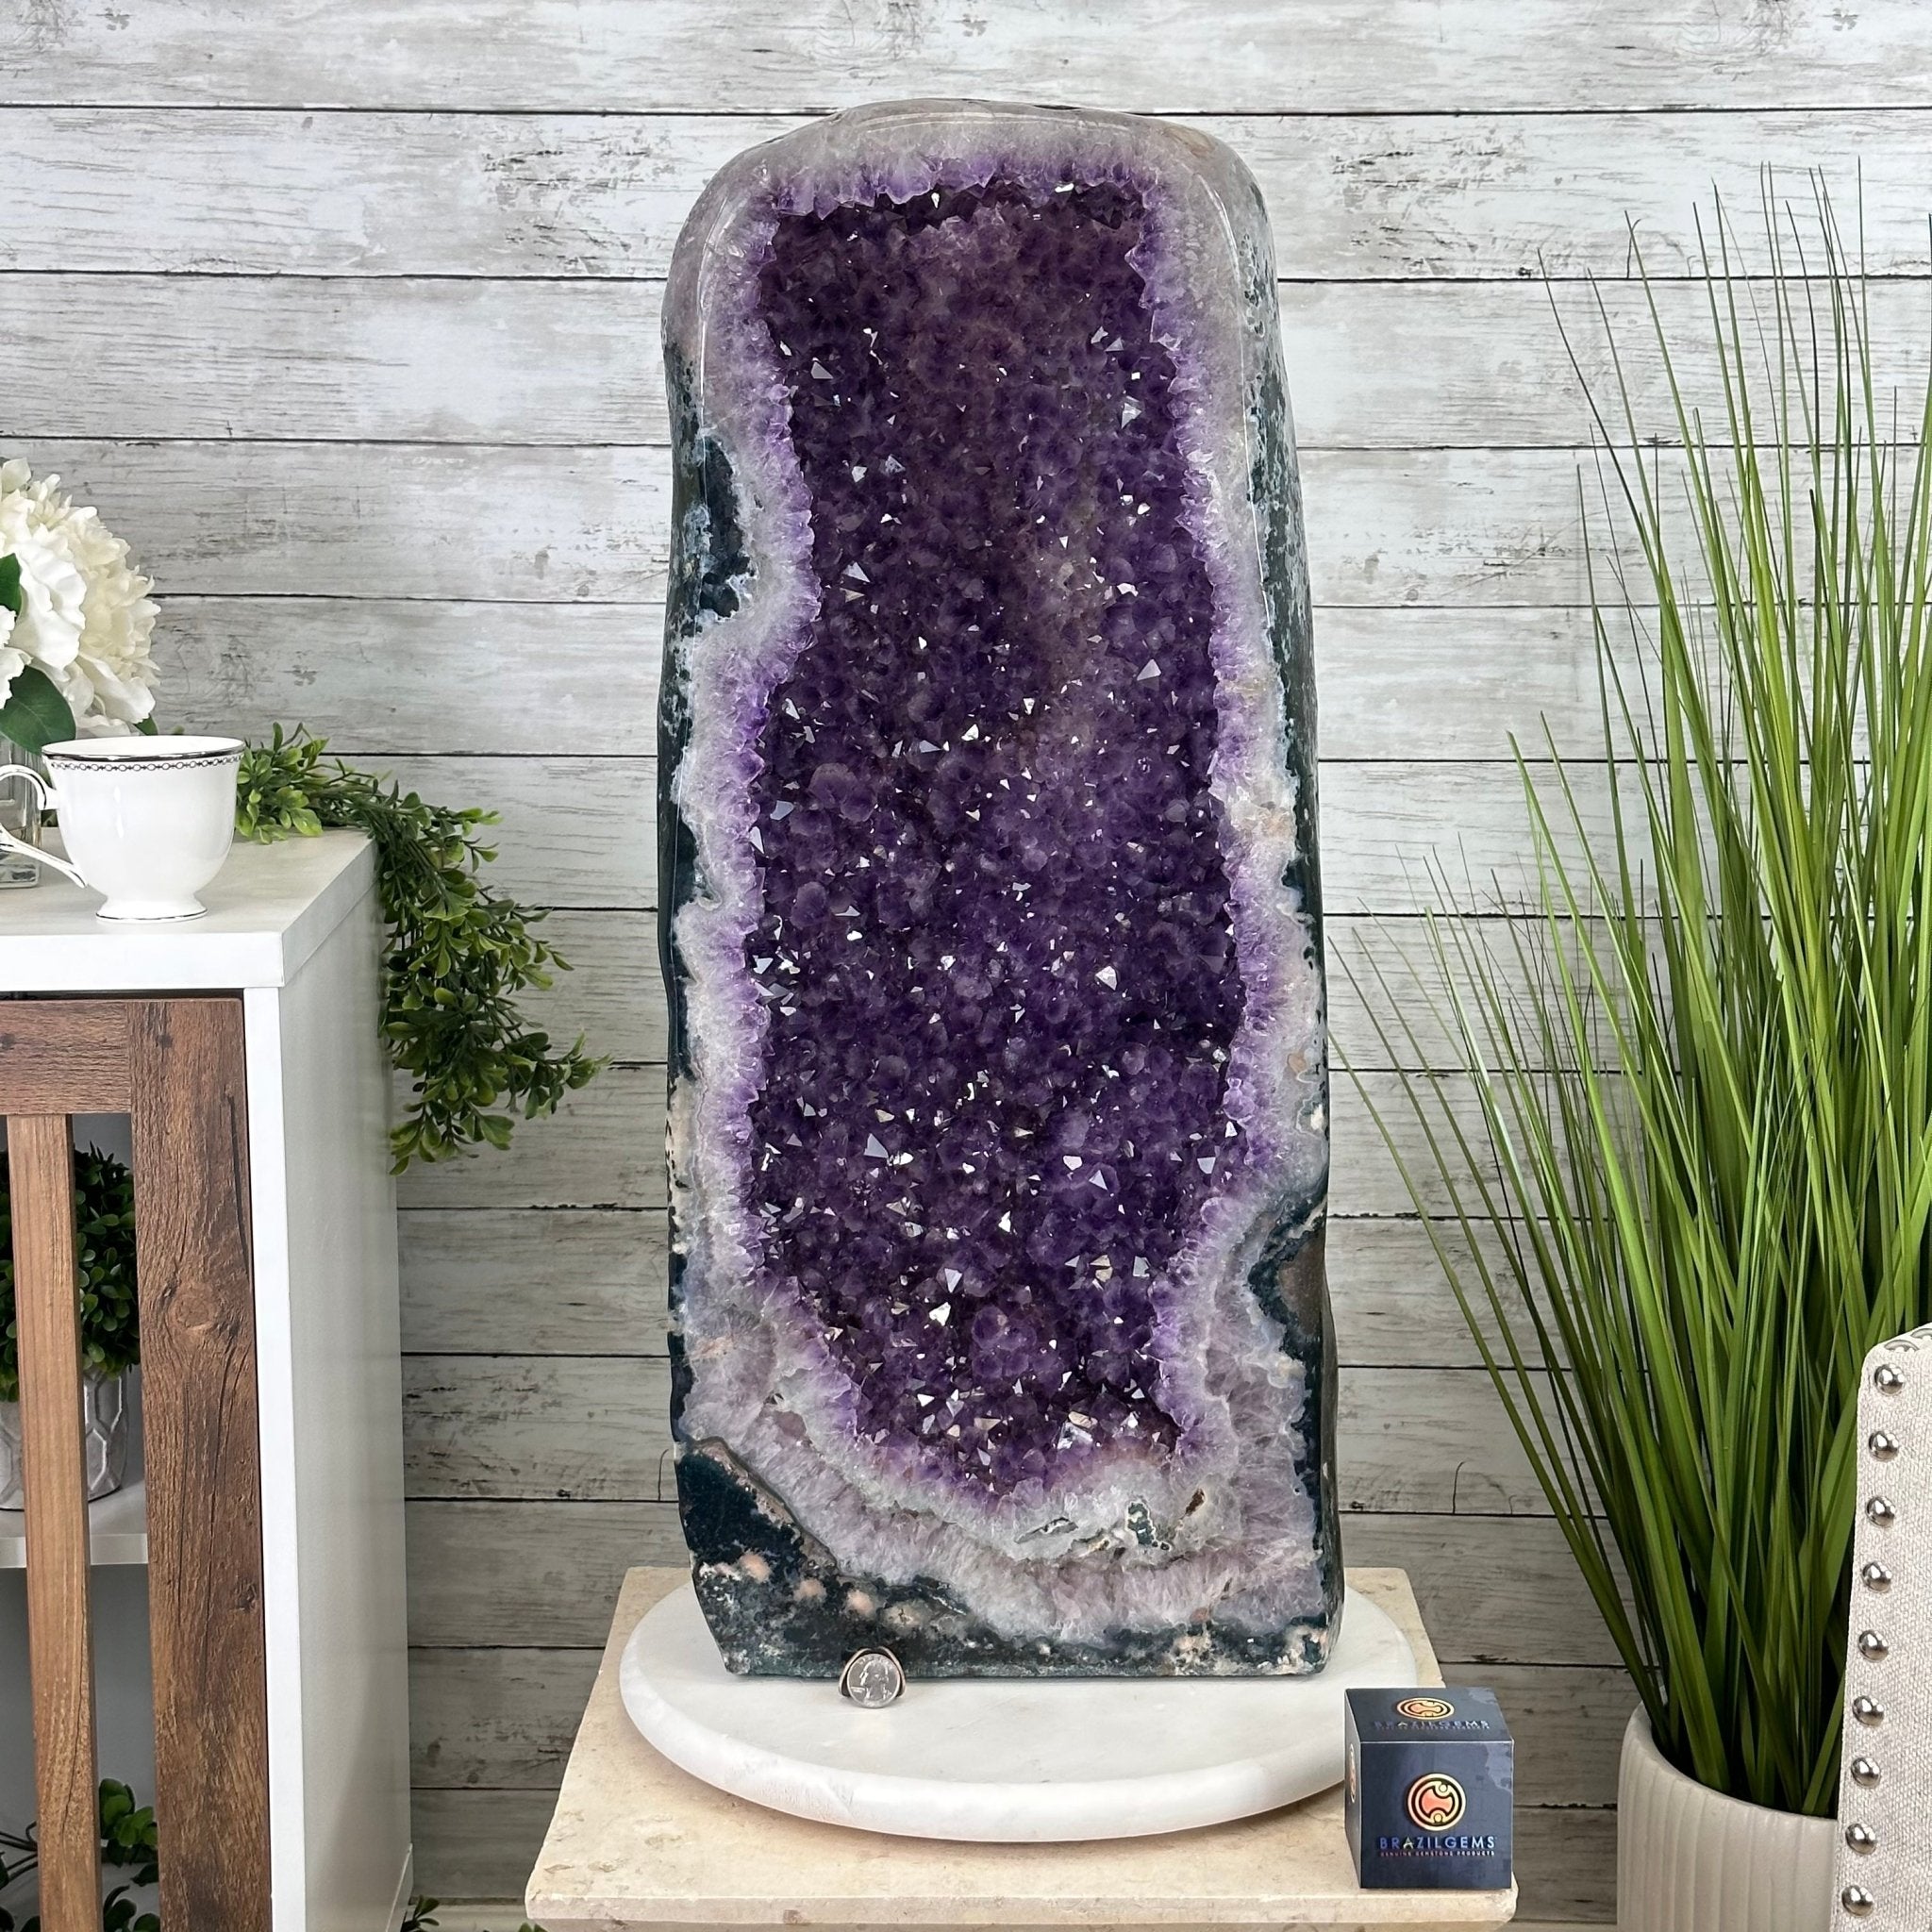 Extra Plus Quality Polished Brazilian Amethyst Cathedral, 96.2 lbs & 27.75" tall Model #5602-0057 by Brazil Gems - Brazil GemsBrazil GemsExtra Plus Quality Polished Brazilian Amethyst Cathedral, 96.2 lbs & 27.75" tall Model #5602-0057 by Brazil GemsPolished Cathedrals5602-0057